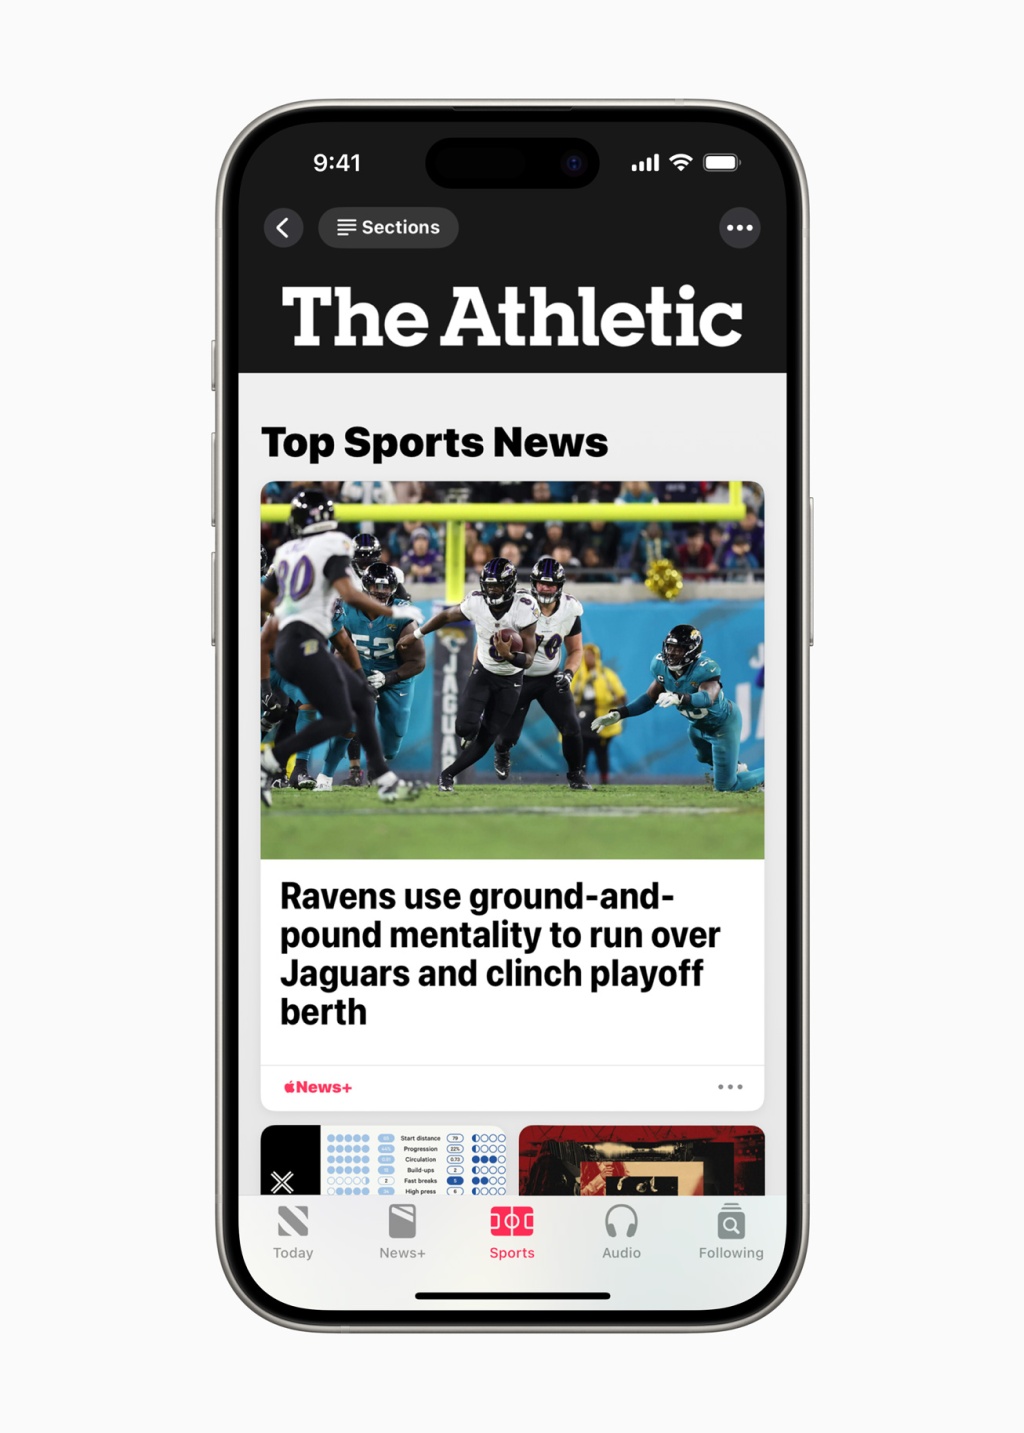 Apple adds The Athletic to Apple News+ and Wirecutter to Apple News